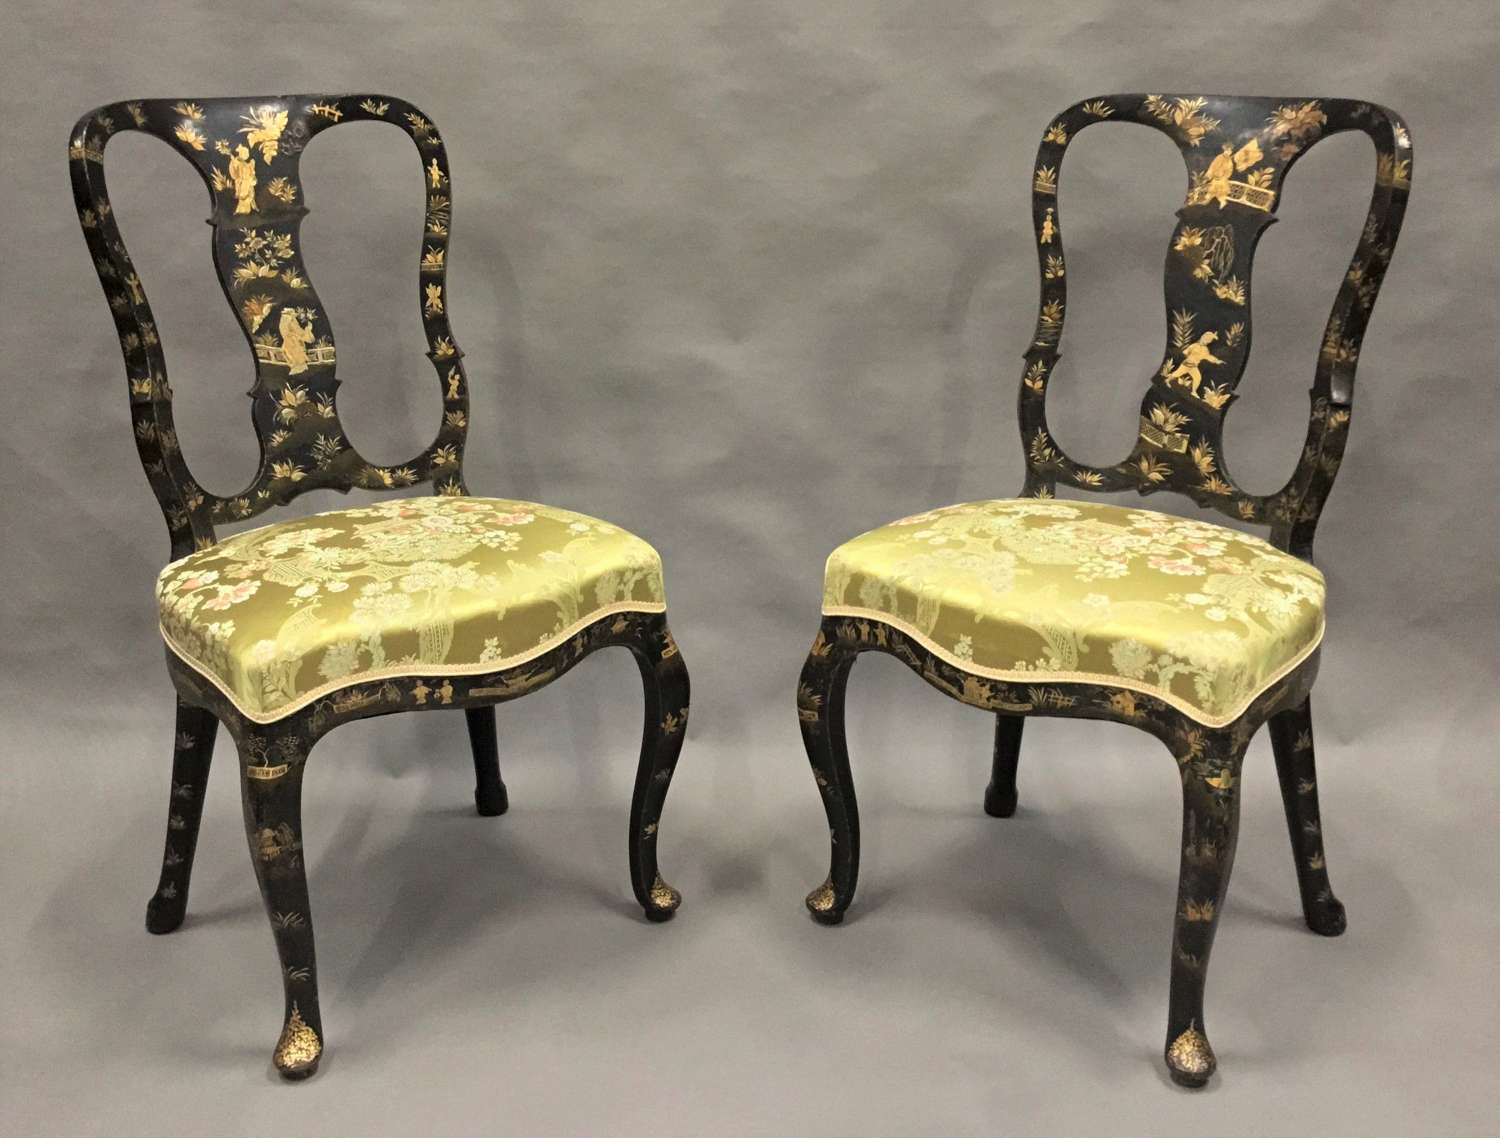 Stylish late C18th pair of Dutch lacquered side chairs